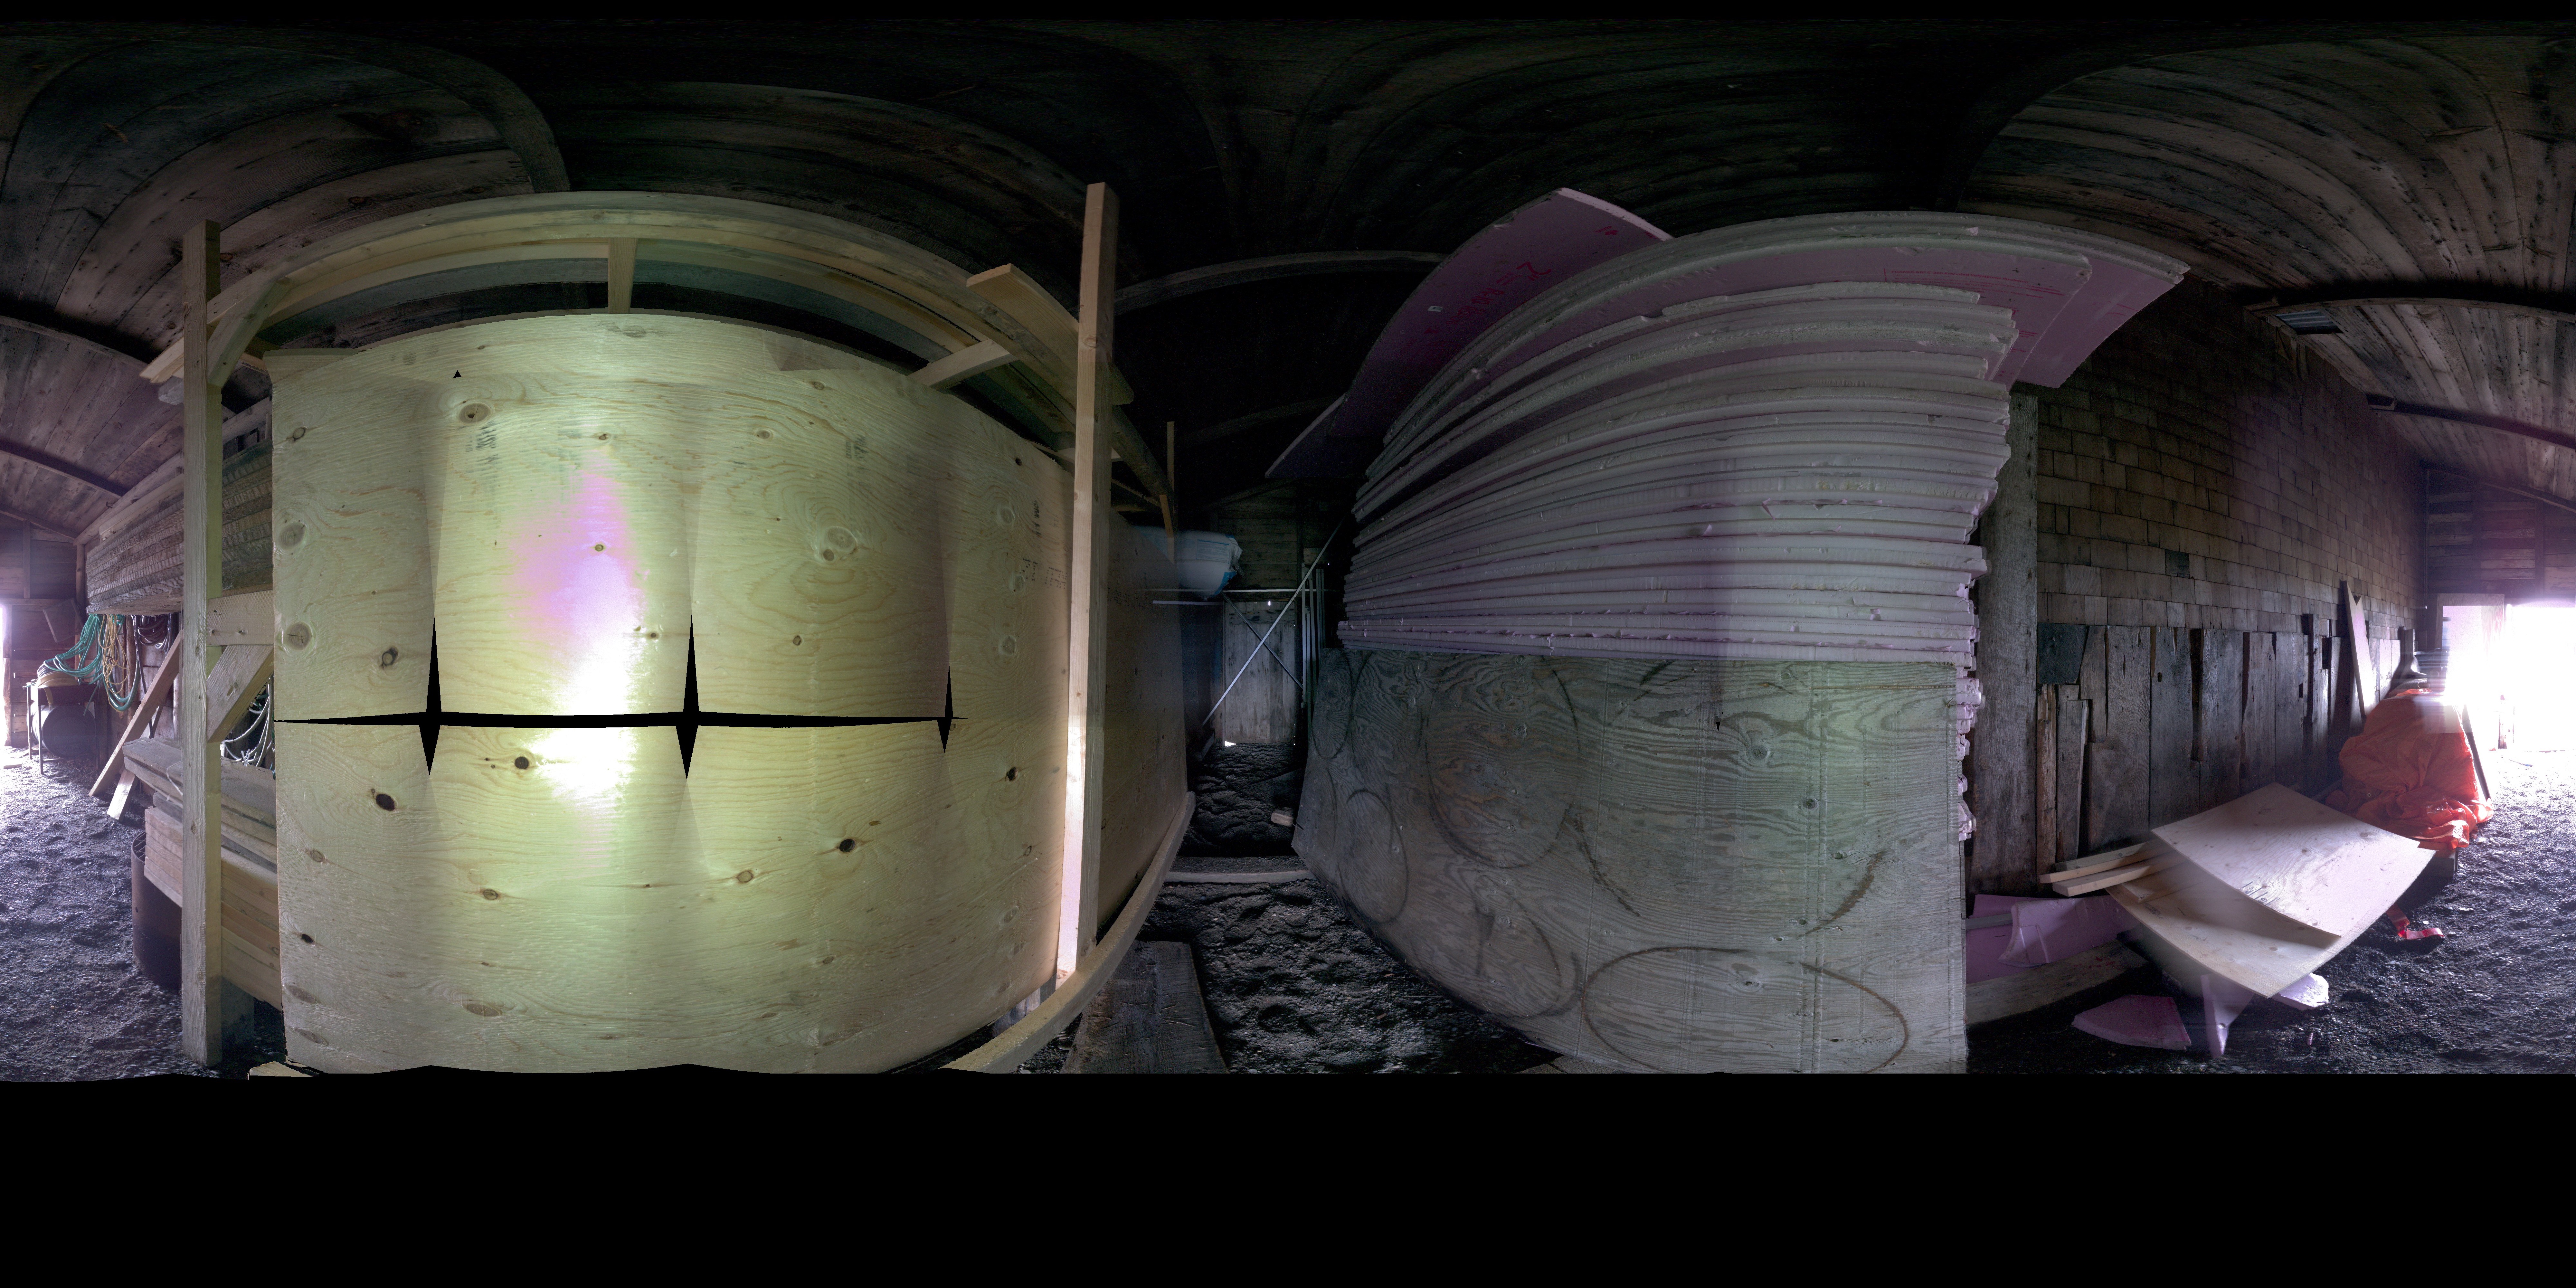 Panoramic view of the Pacific Steam Whaling Co. Bonehouse interior from the Leica BKL 360, scanning location 1